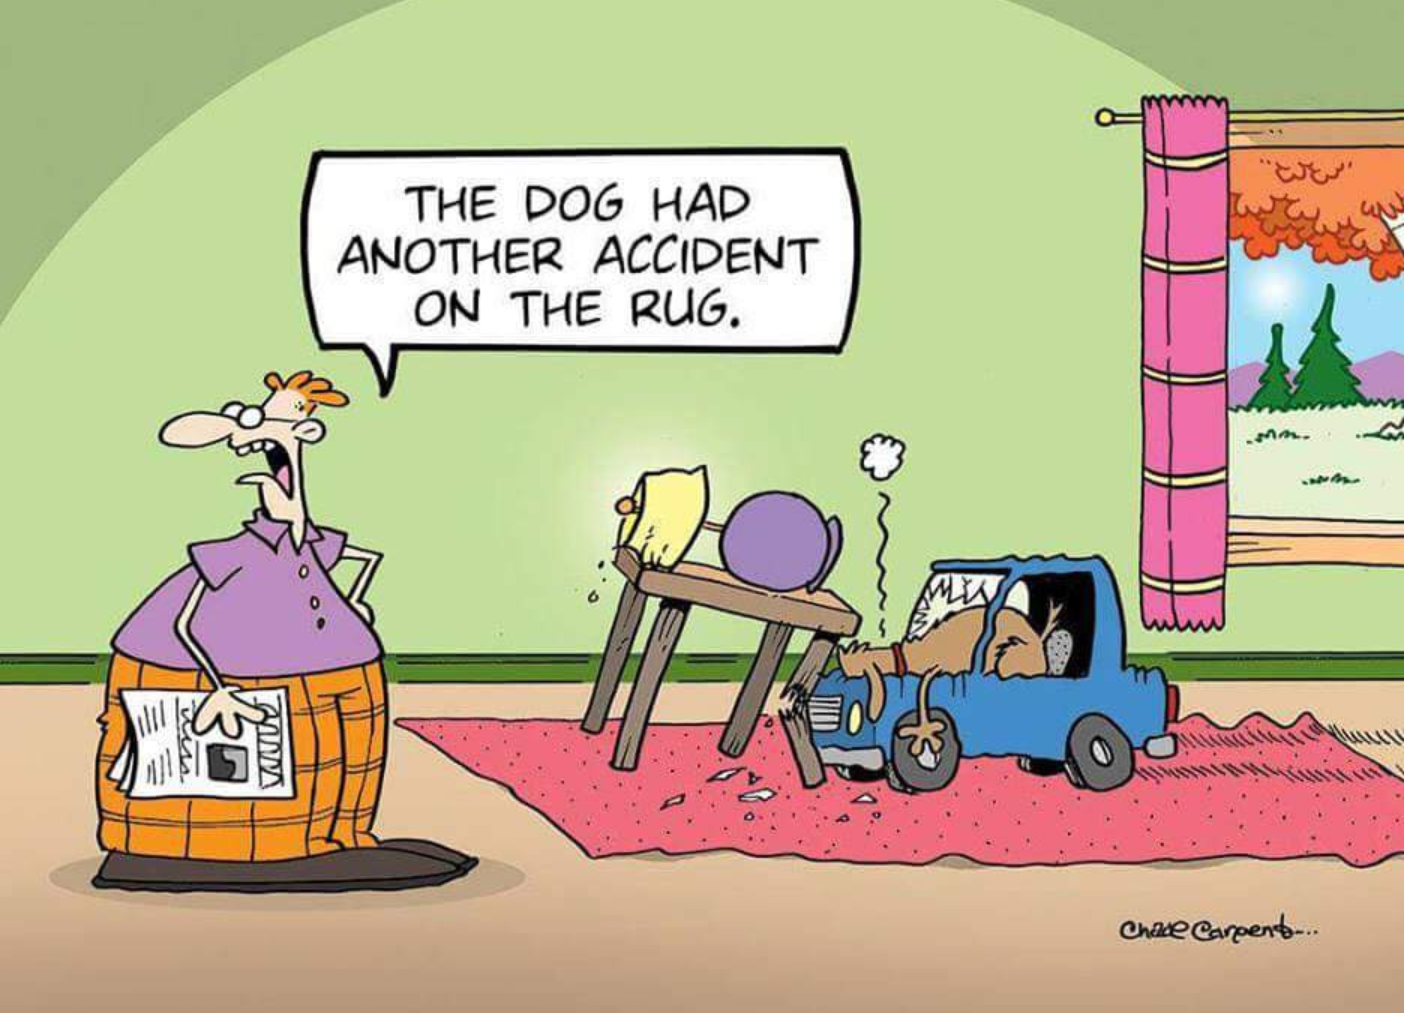 tundra dog comic - The Dog Had Another Accident On The Rug. Wa Nry Una Chae Carpent